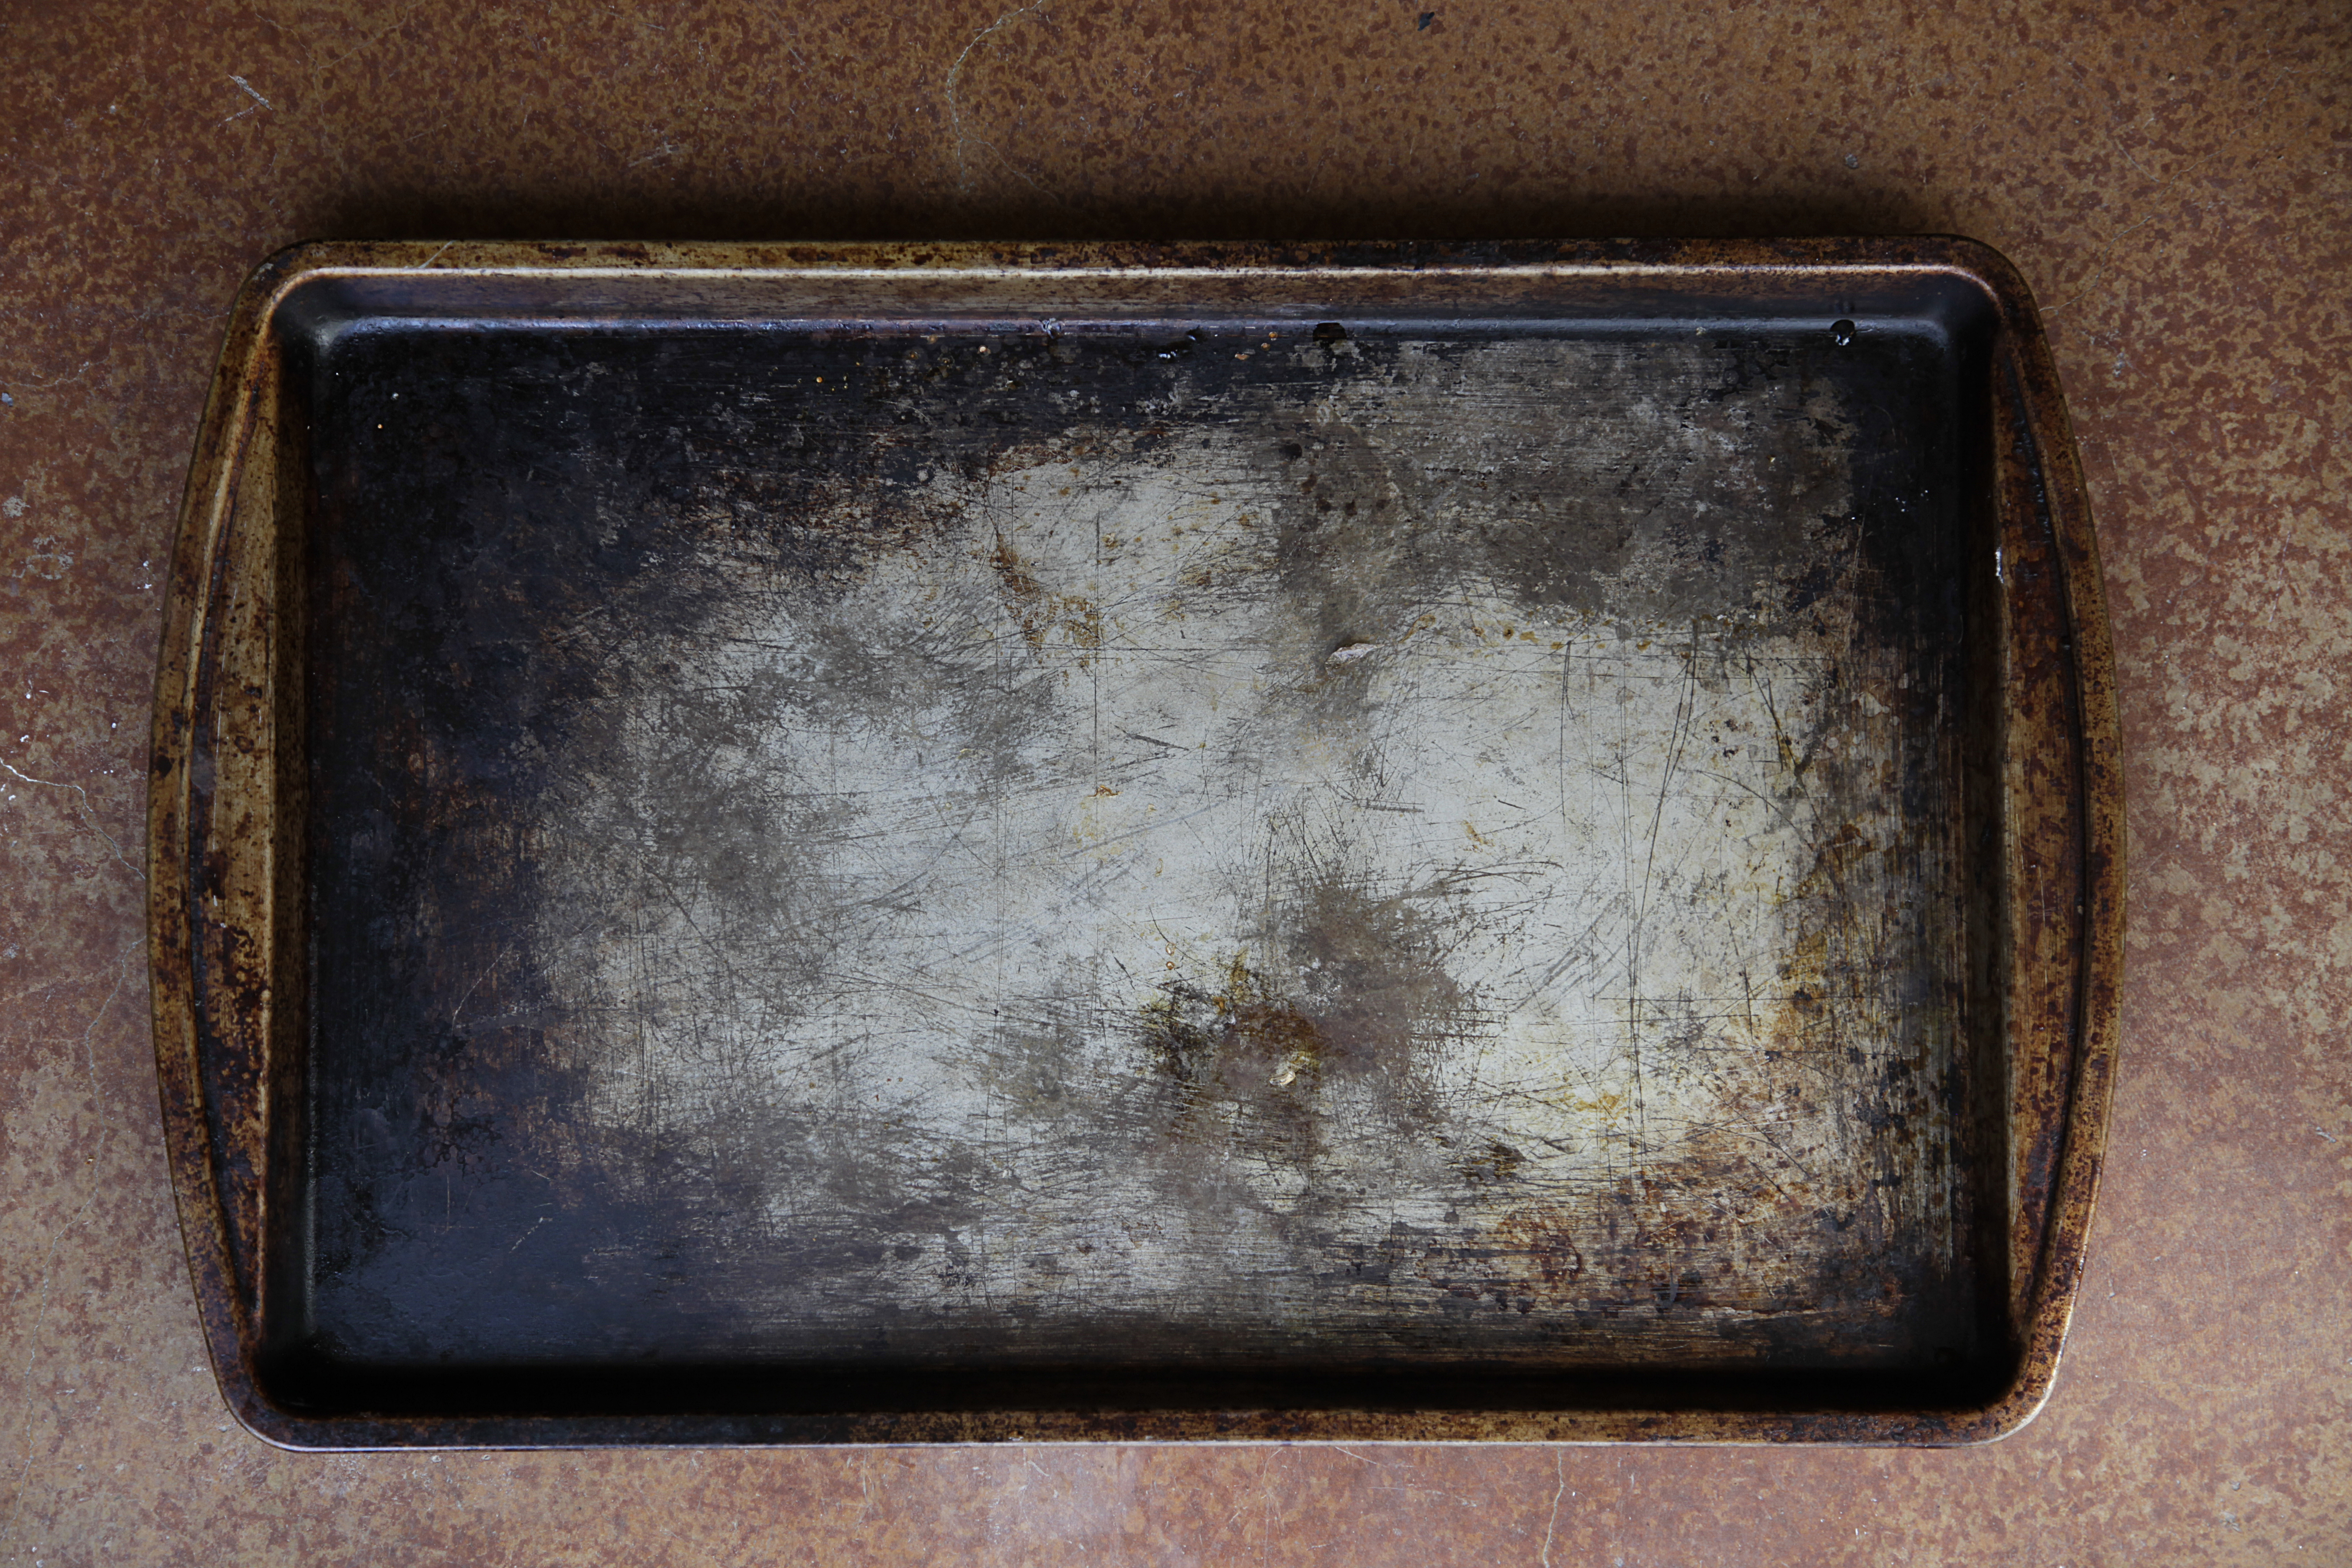 How to Clean a Burnt Baking Sheet